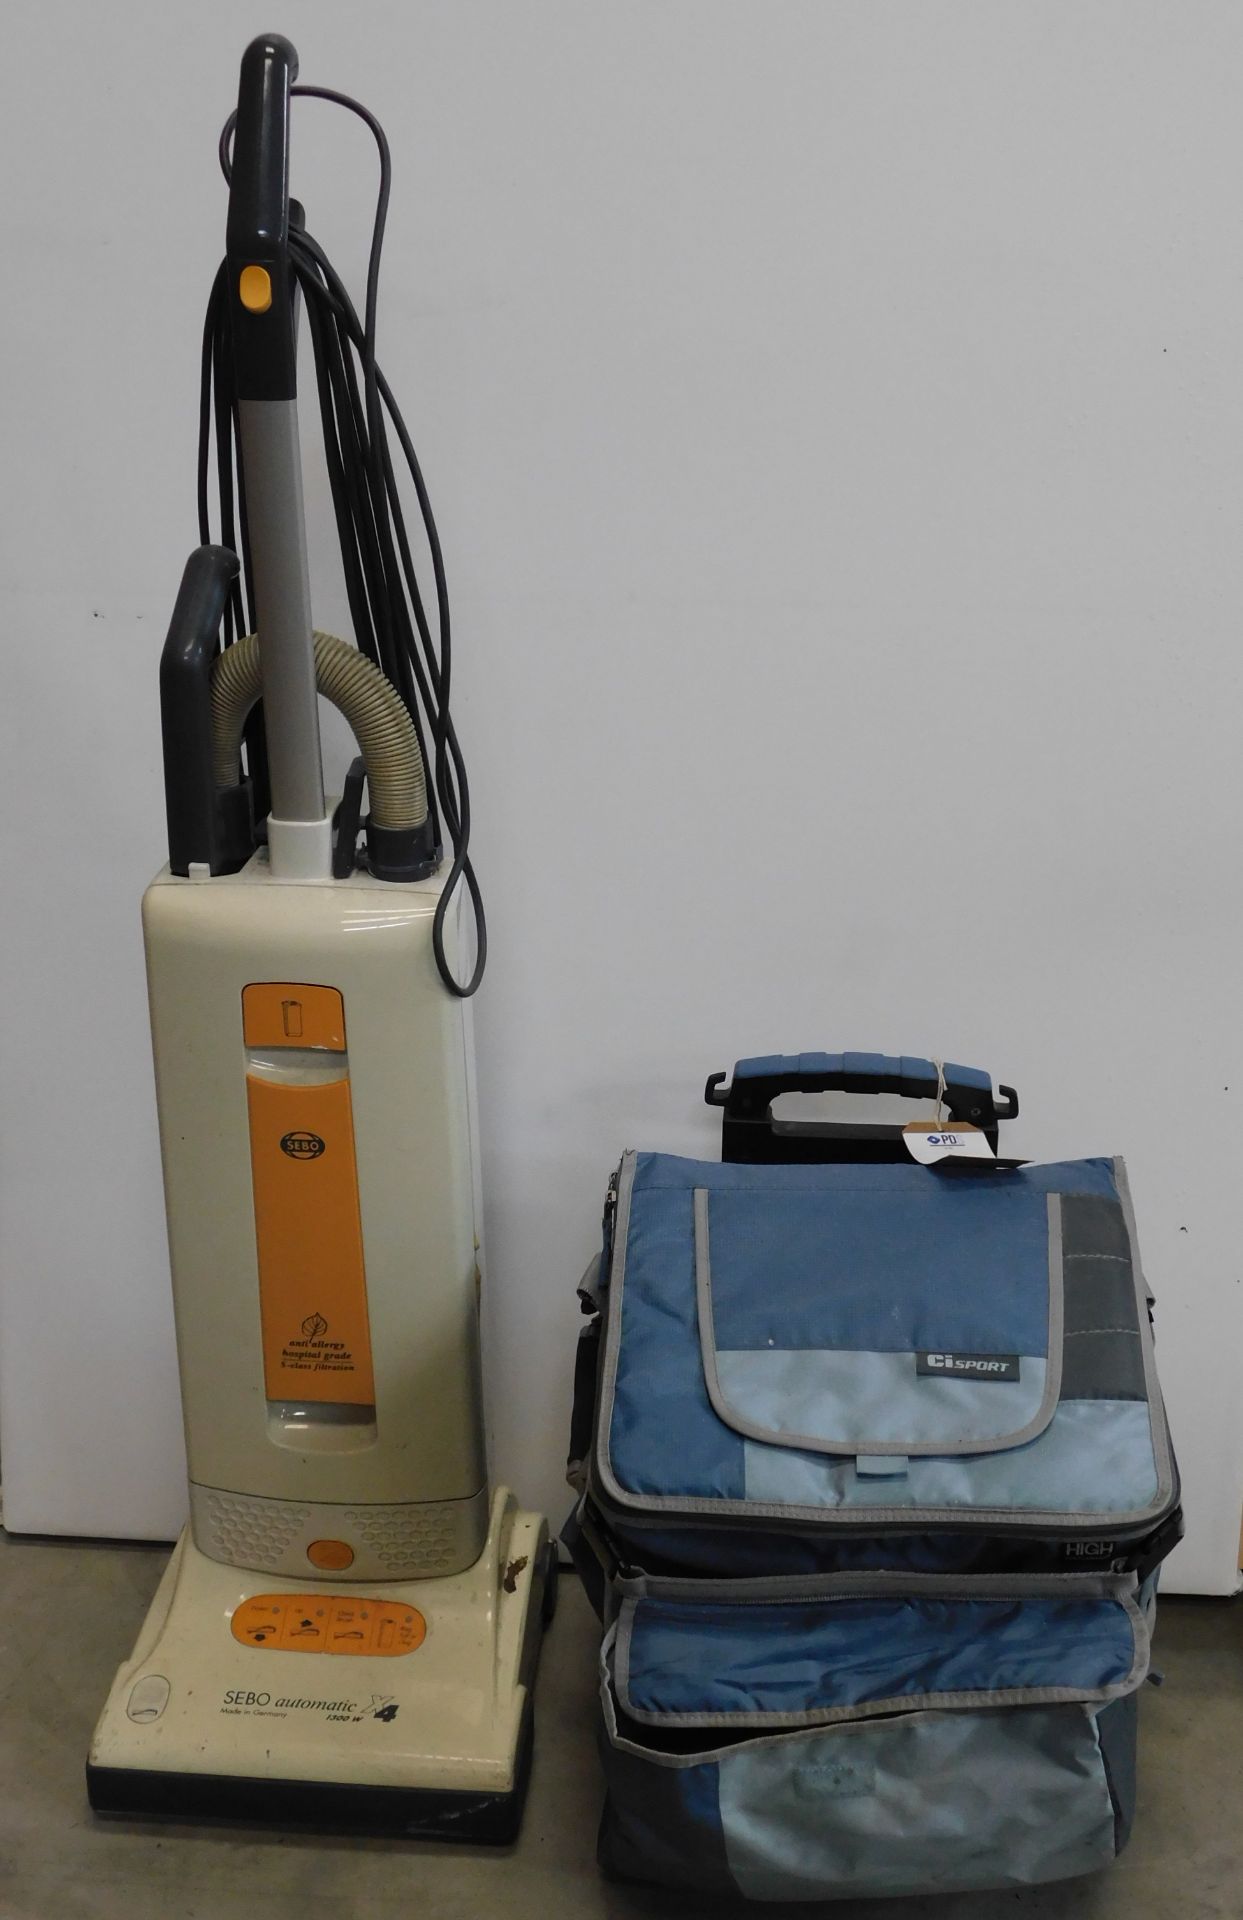 Sebo Automatic X4 1300W Upright Vacuum Cleaner, Ci Sport Wheeled Holdall & Miscellaneous Items (